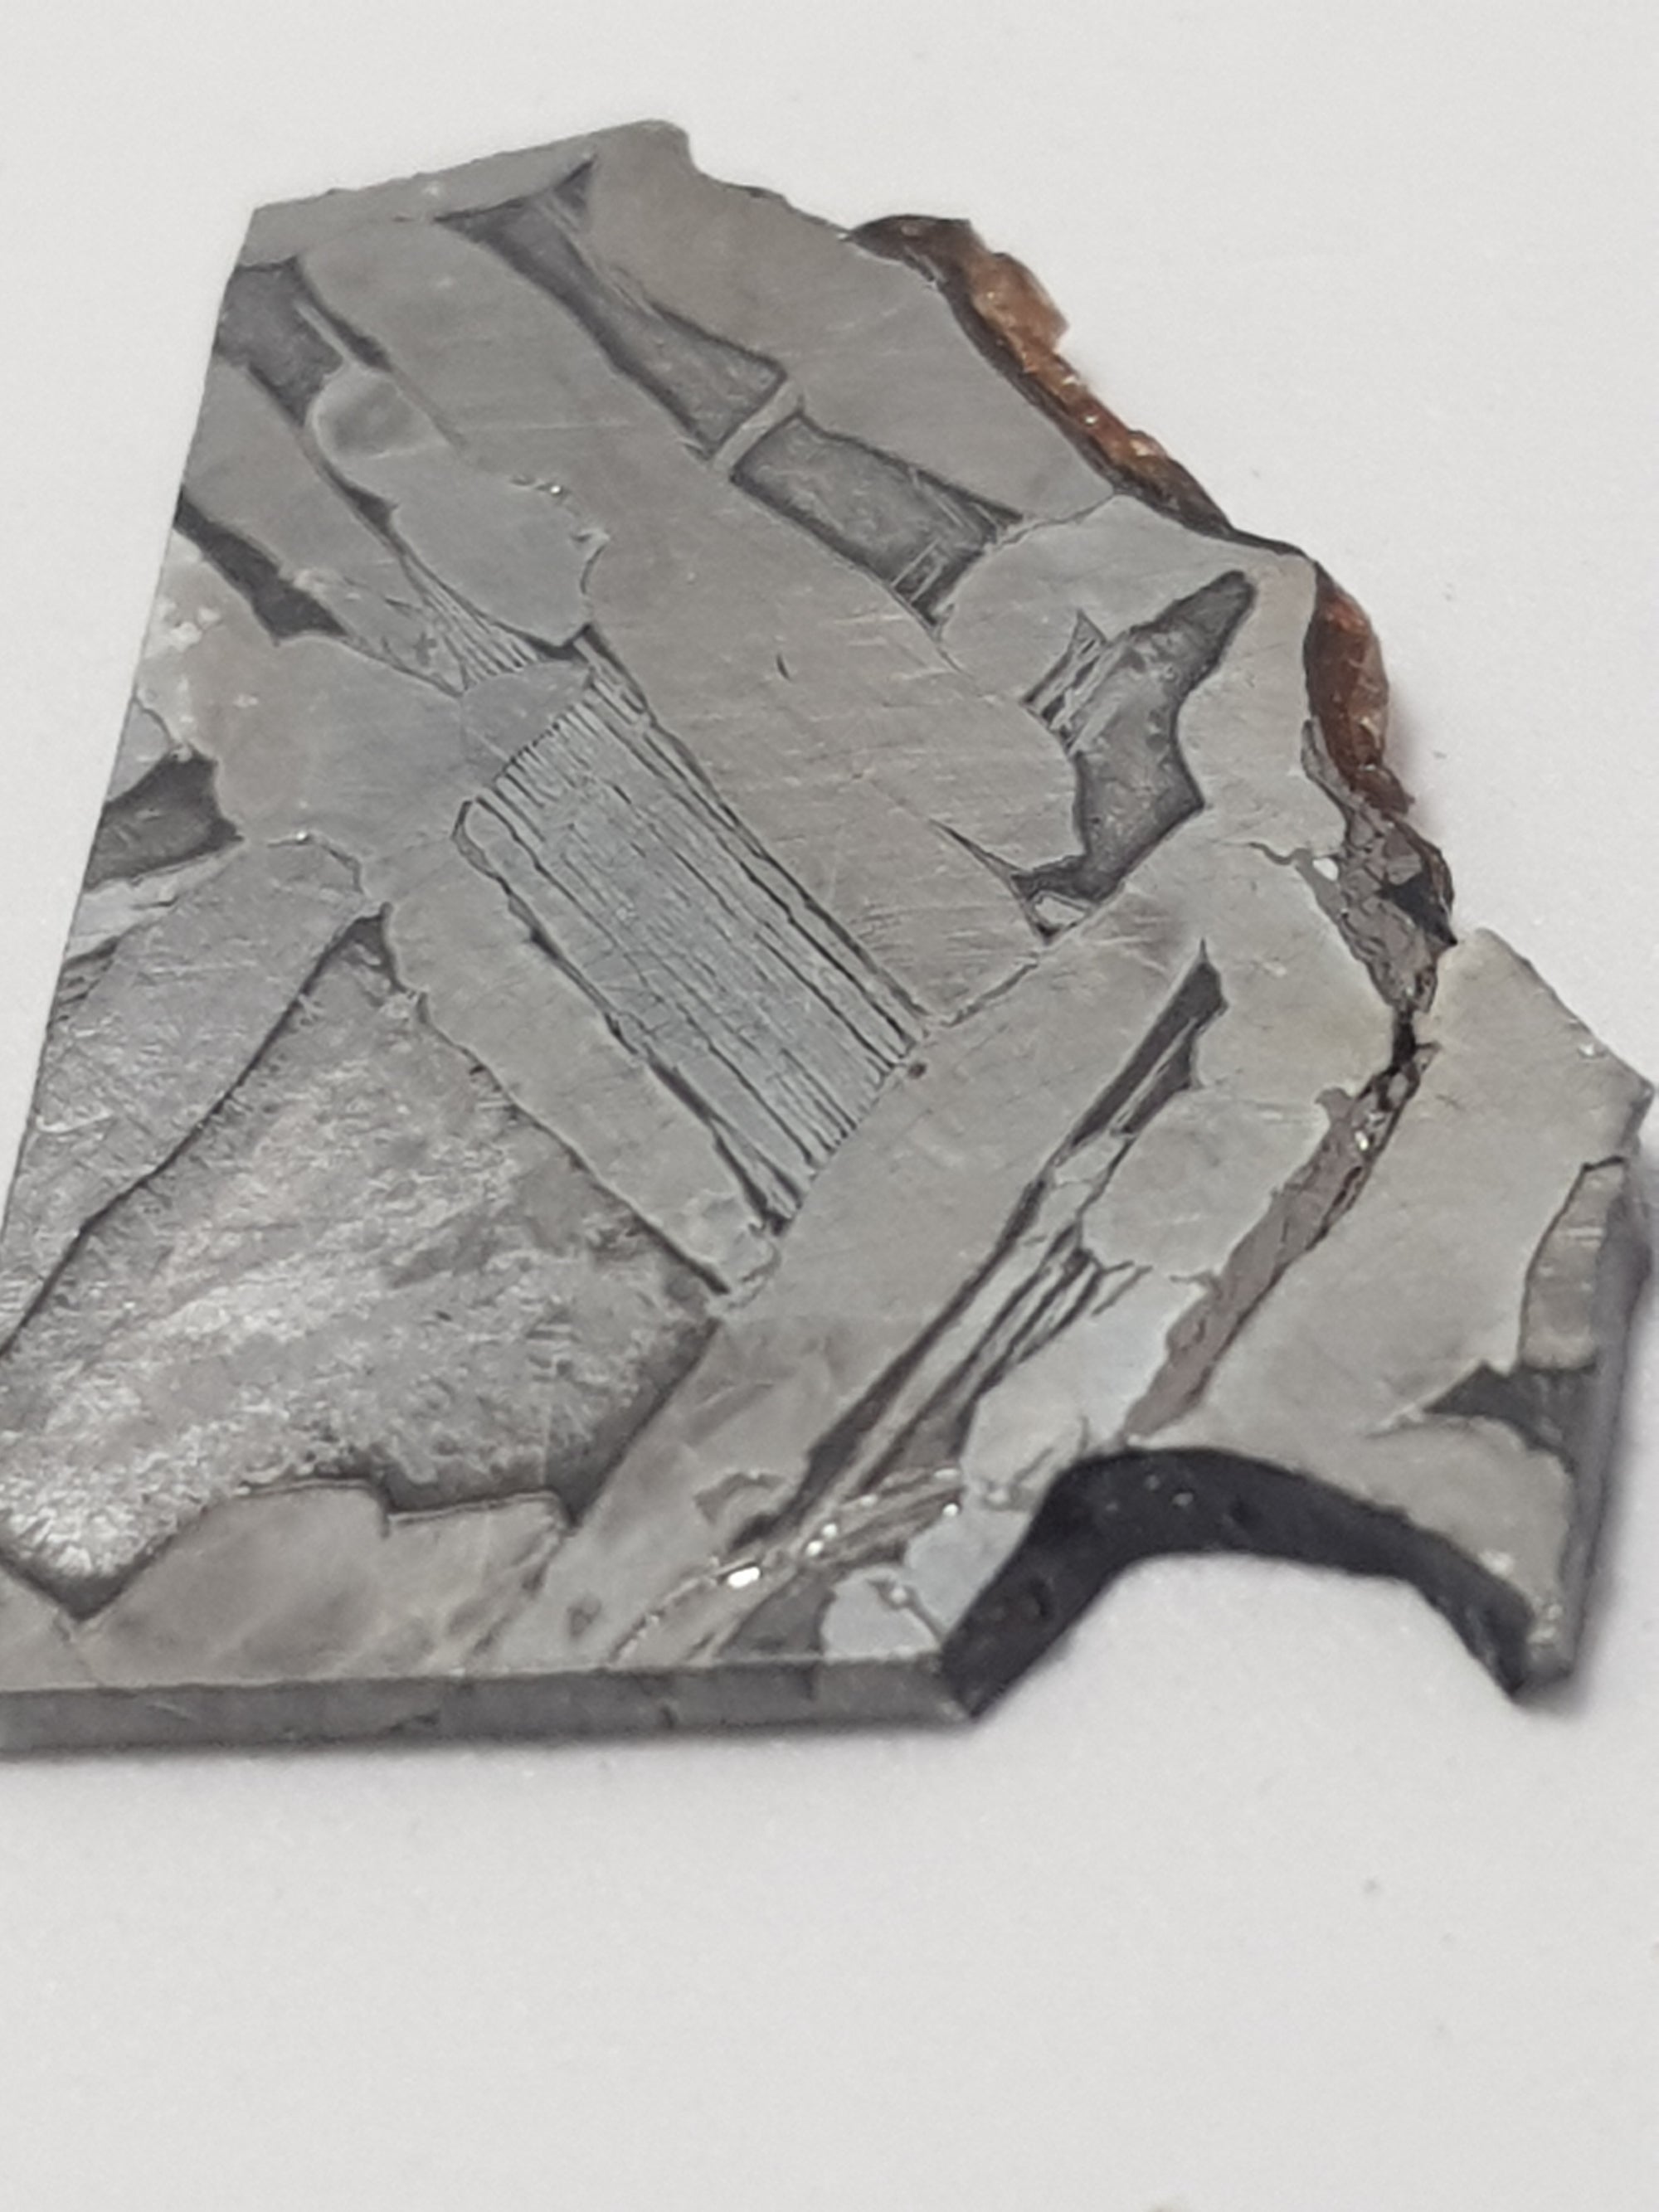 an acid etched cross section of fukang. The sample has straight edges where it has been cut. there is a gap on the bottom right and a rough edge along the top right. The edge on the top right shows signs of remnants of a reddish brown material. These were the locations of olivine crystals which are not present on this sample. The metal has a distinctive widmanstatten pattern.